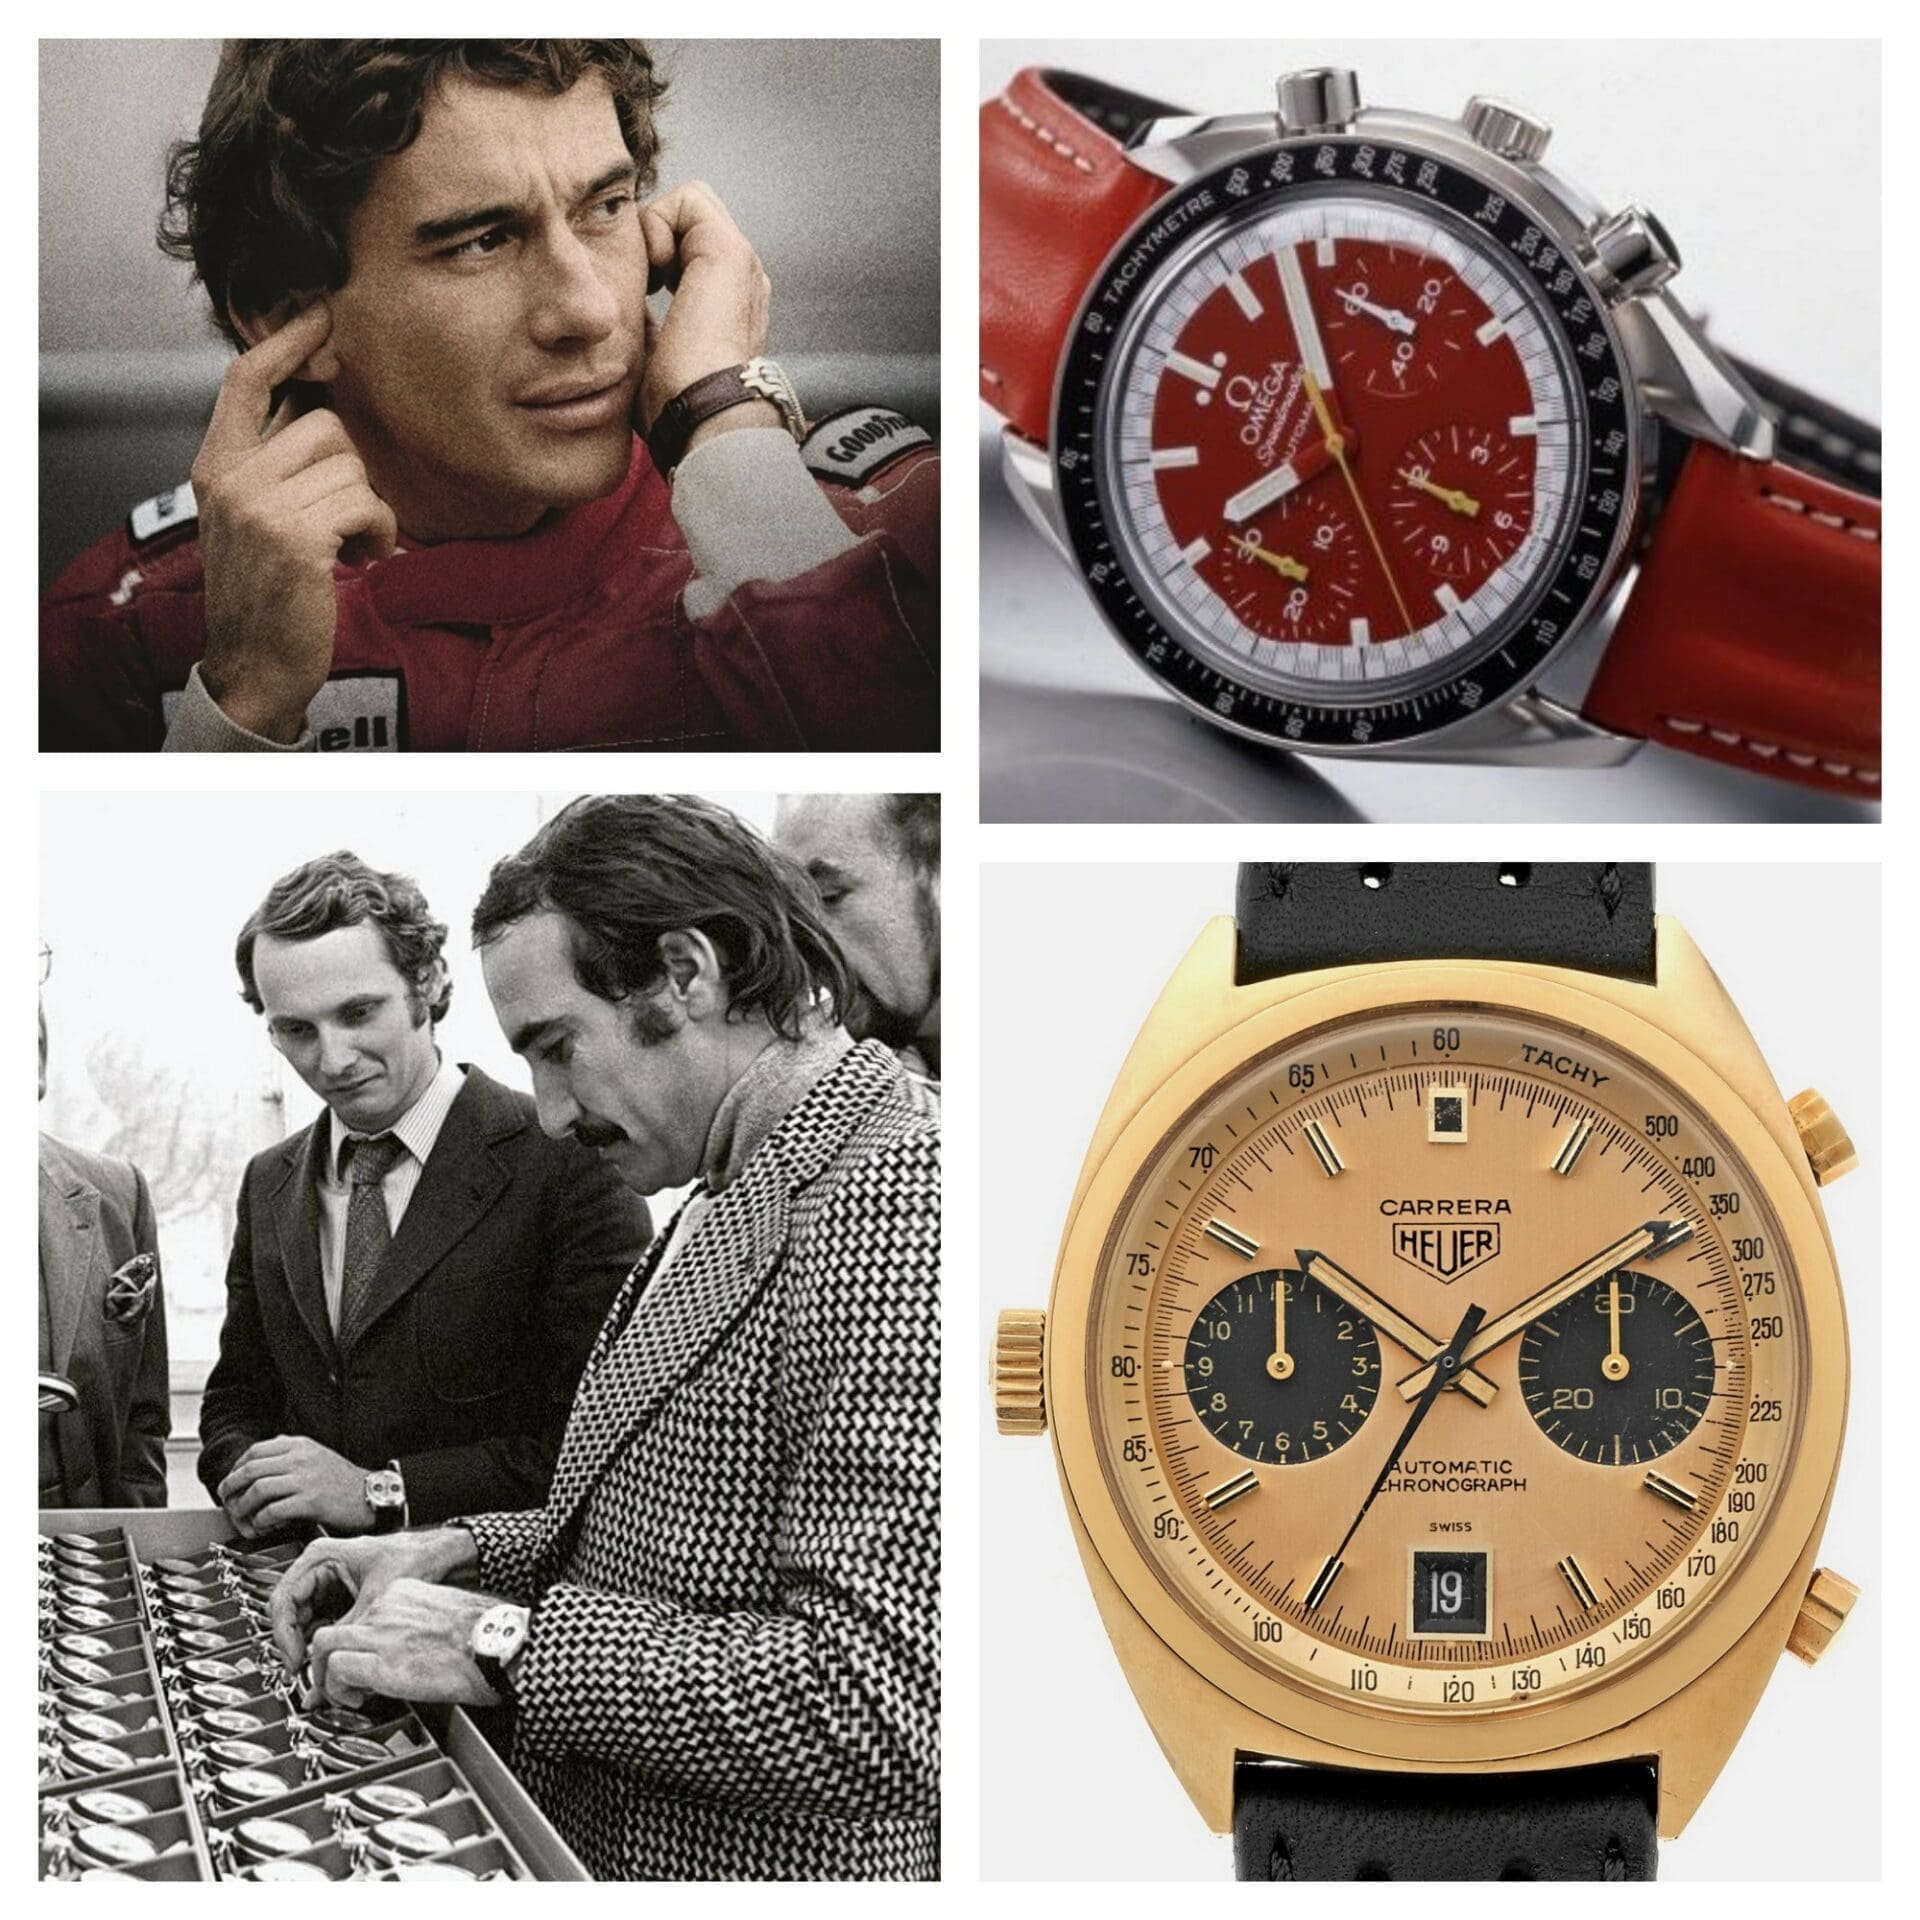 Winning Formula: 5 of the coolest vintage watches in Formula 1